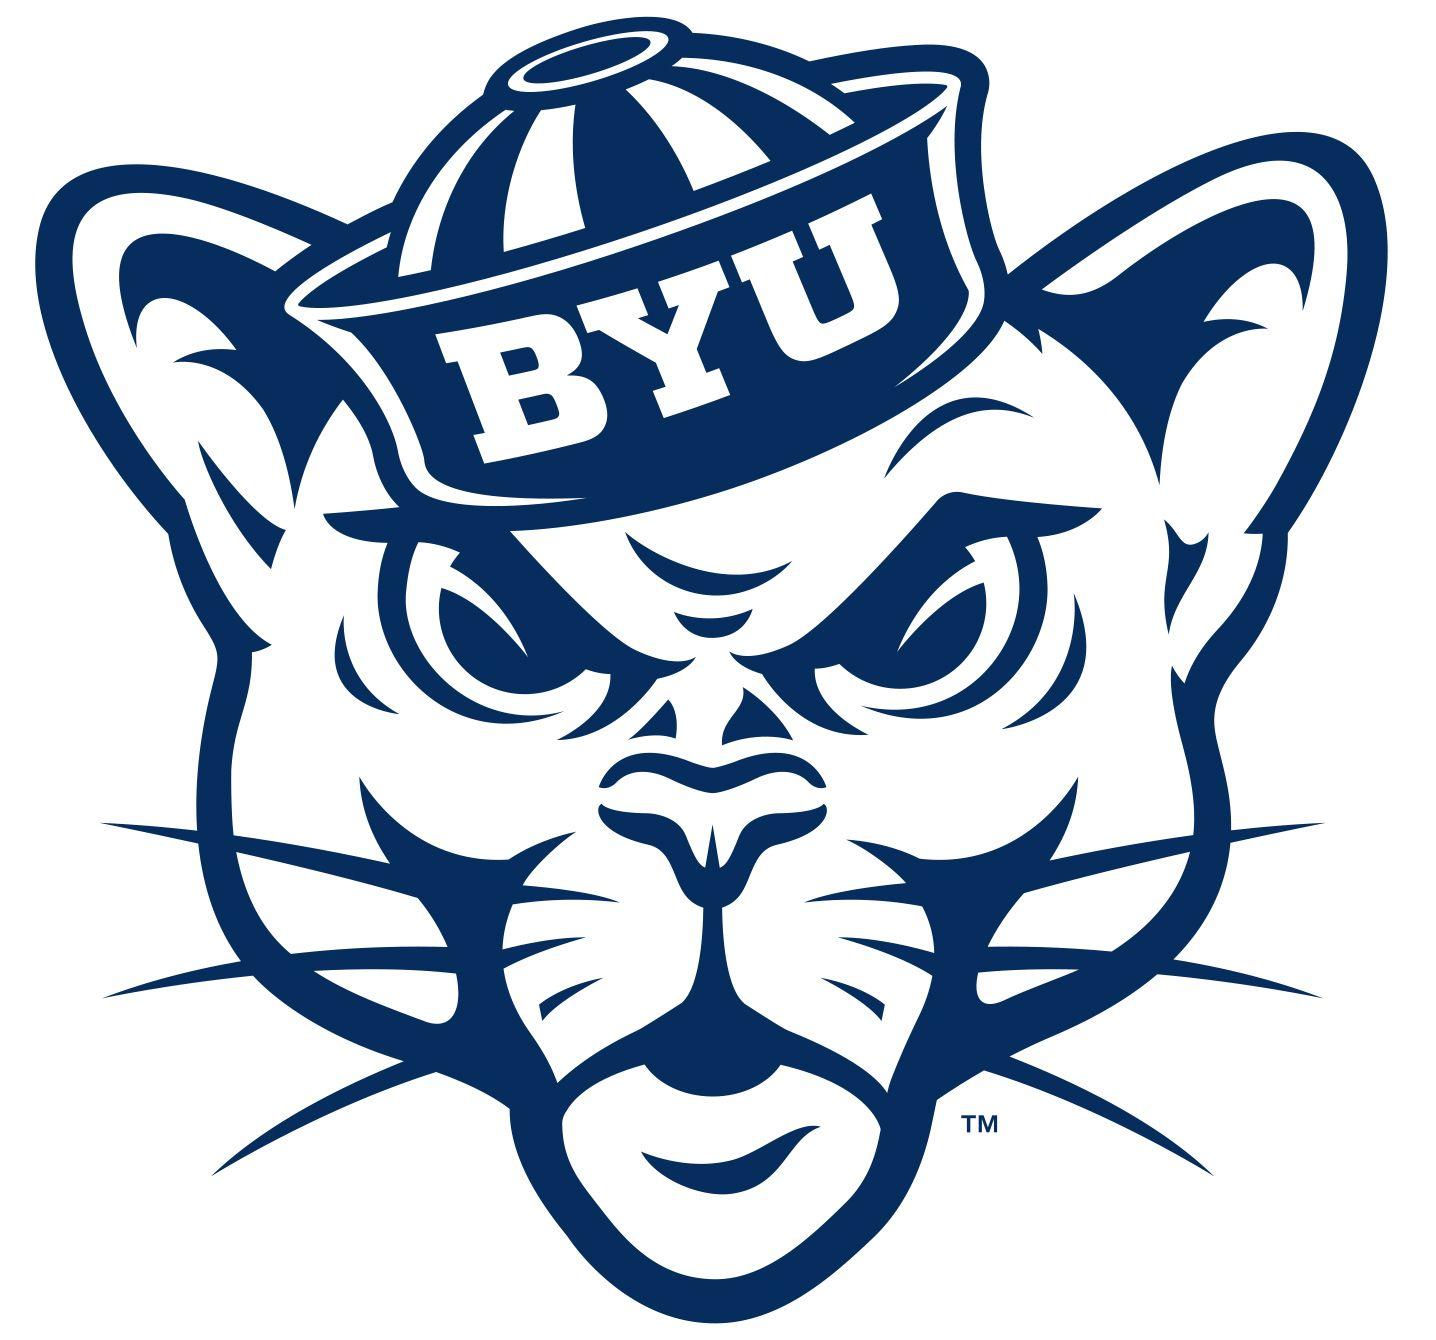 Cool Cougars Logo - Secondary 'sailor cougar' logo reinforces BYU's tradition